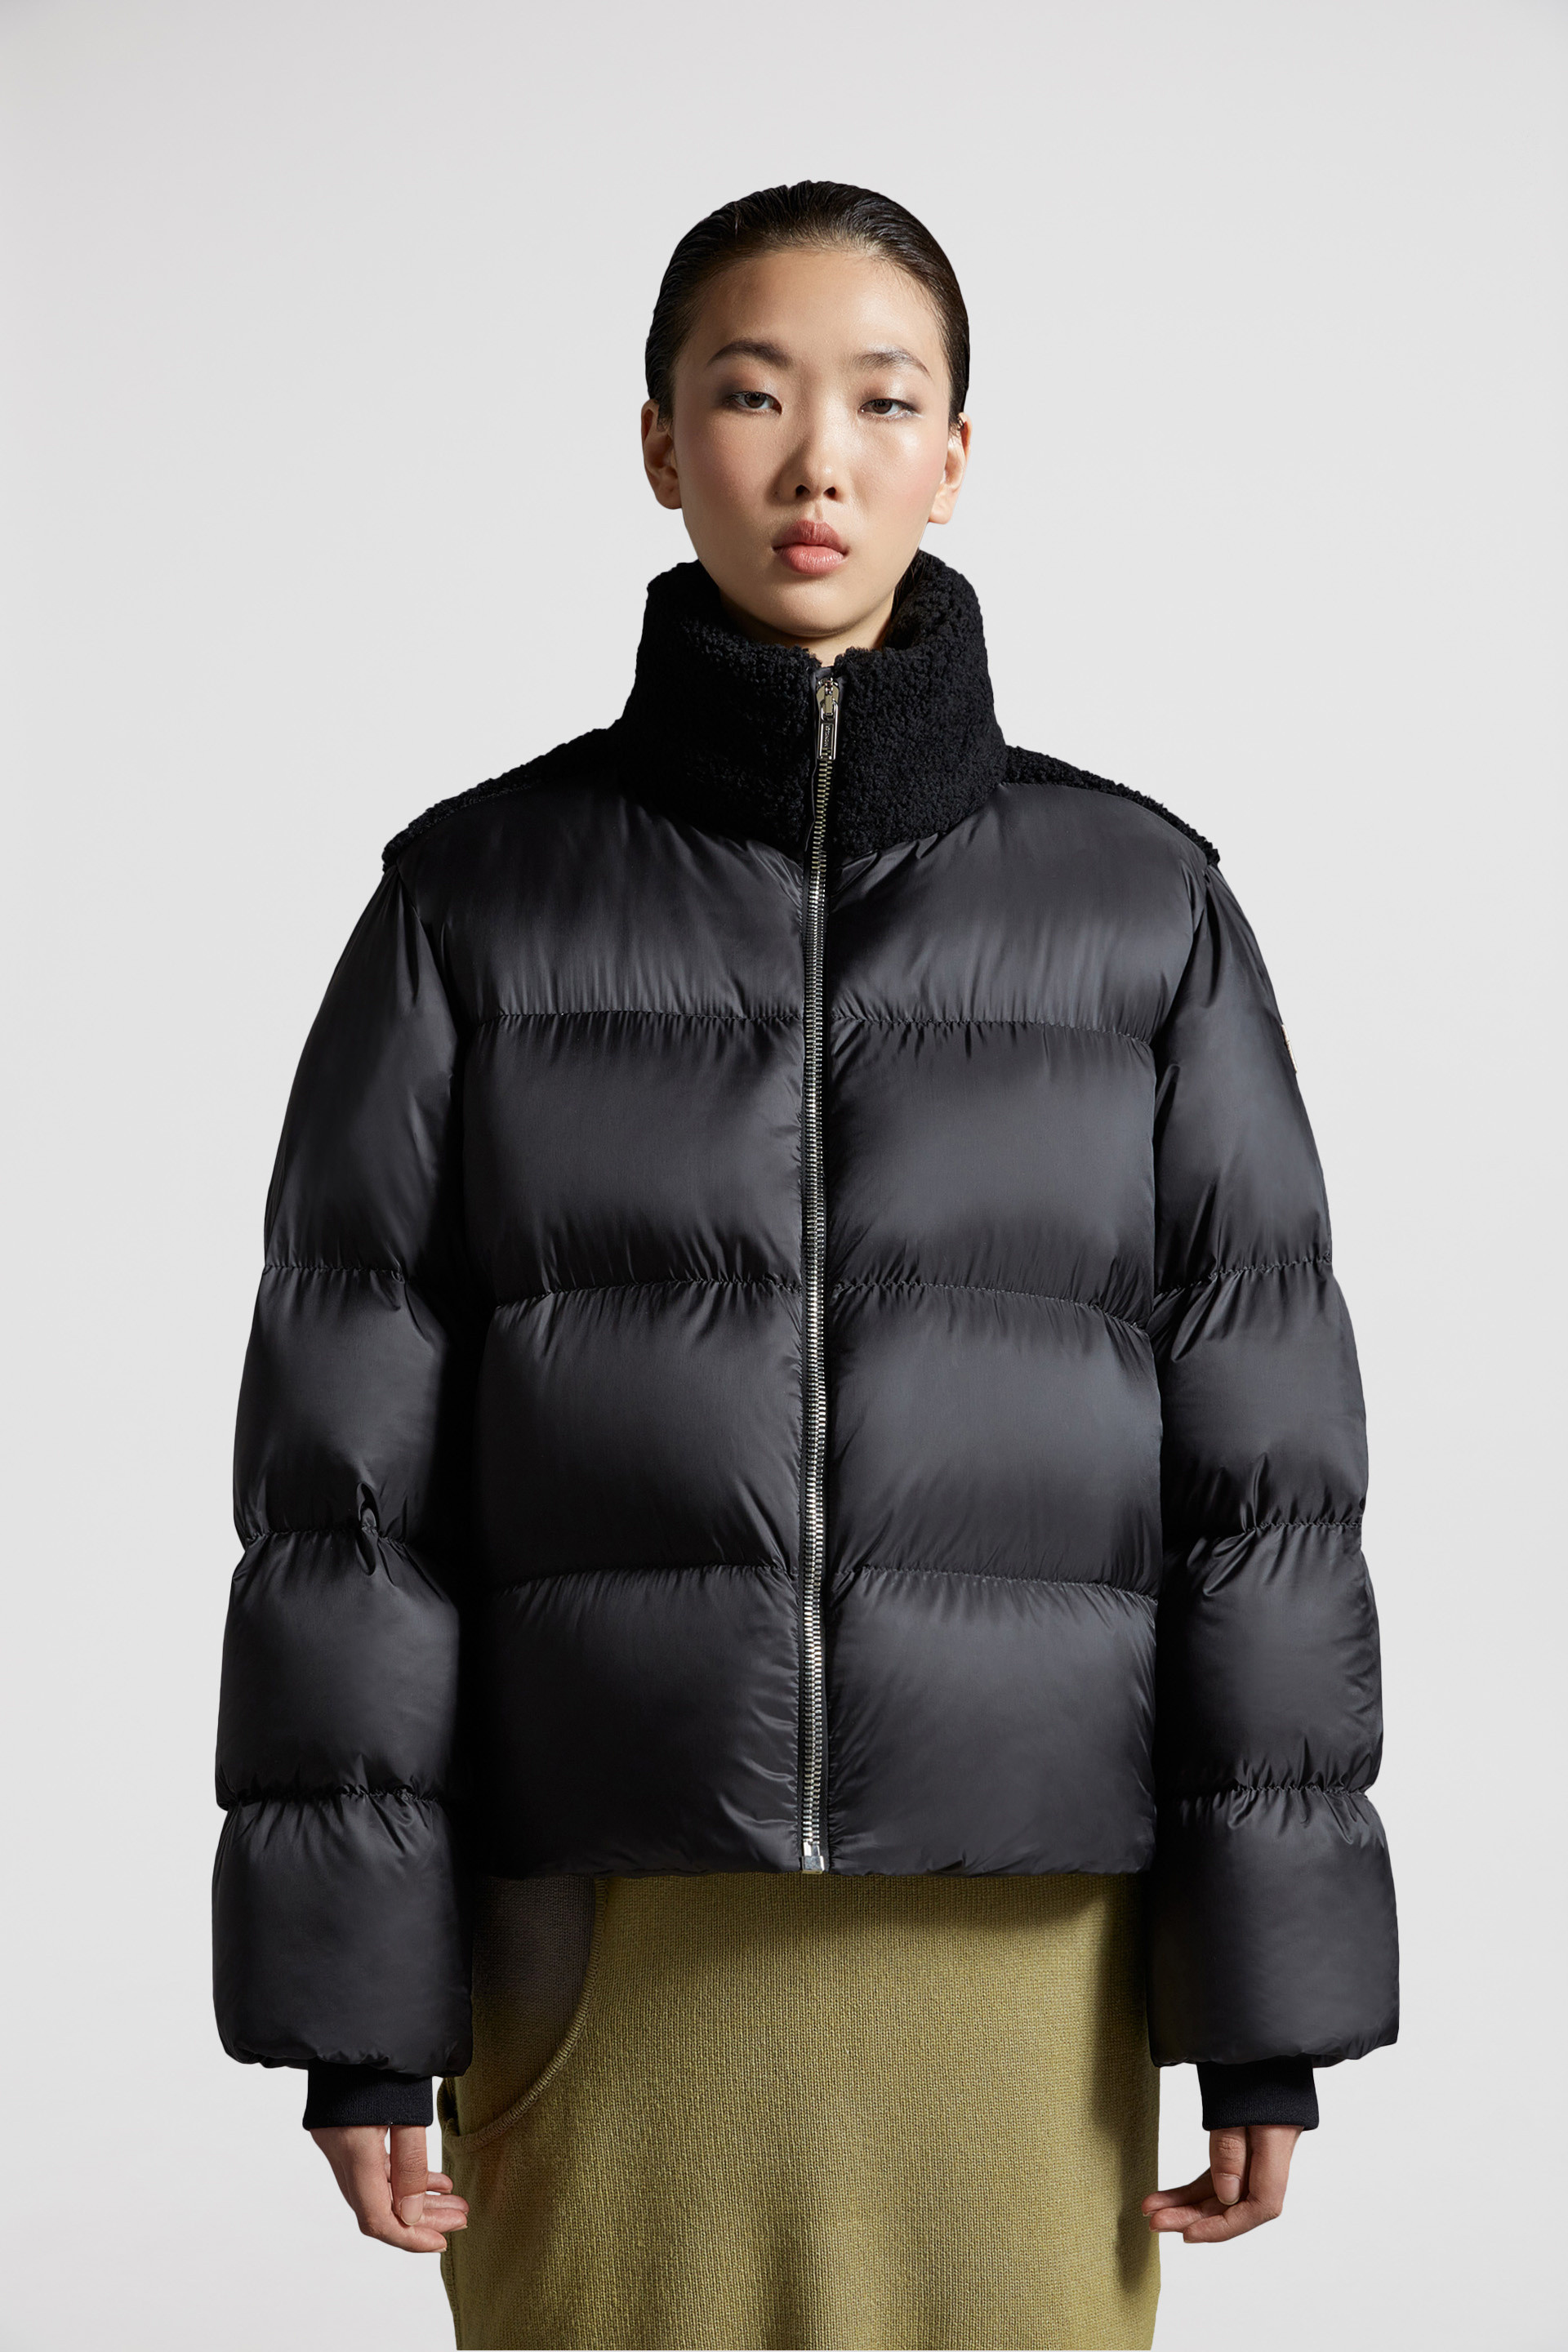 For Special Projects - Moncler + Rick Owens | Moncler JP